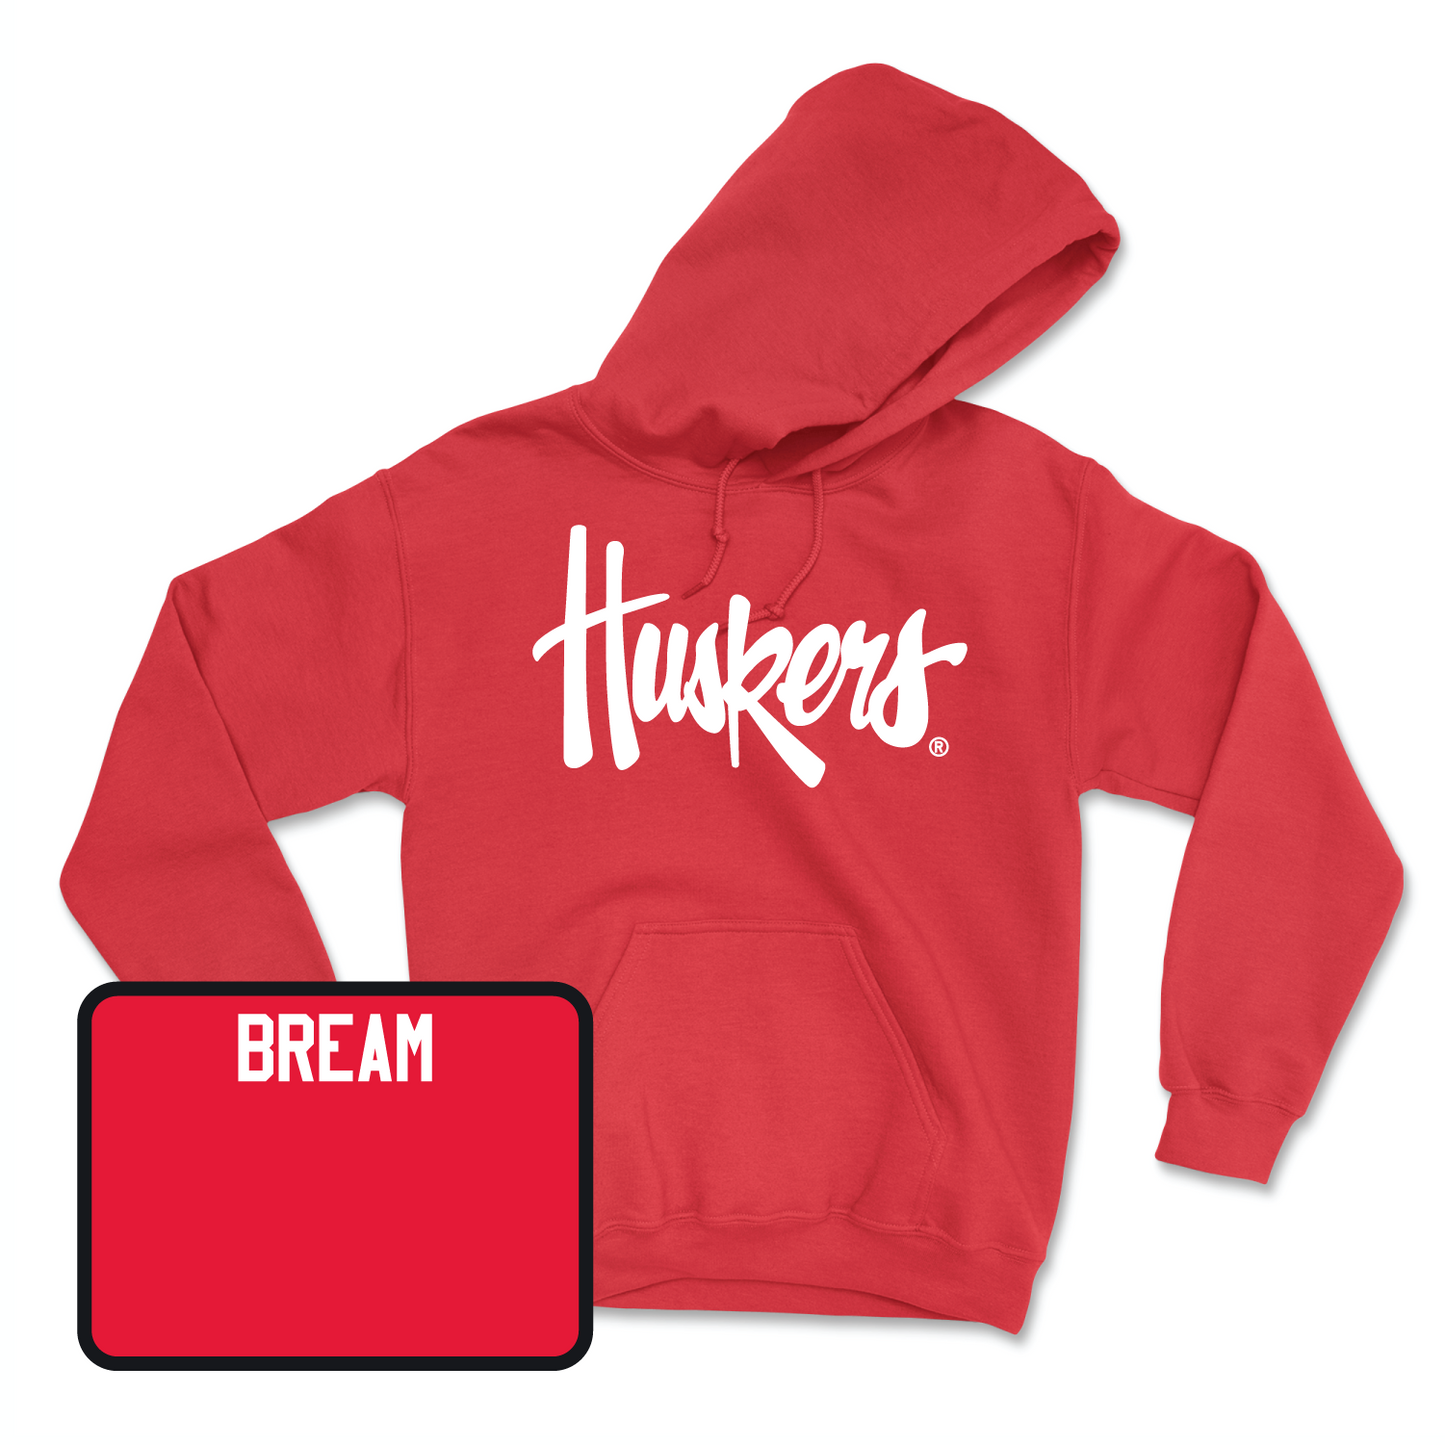 Red Women's Golf Huskers Hoodie Small / Brooke Bream